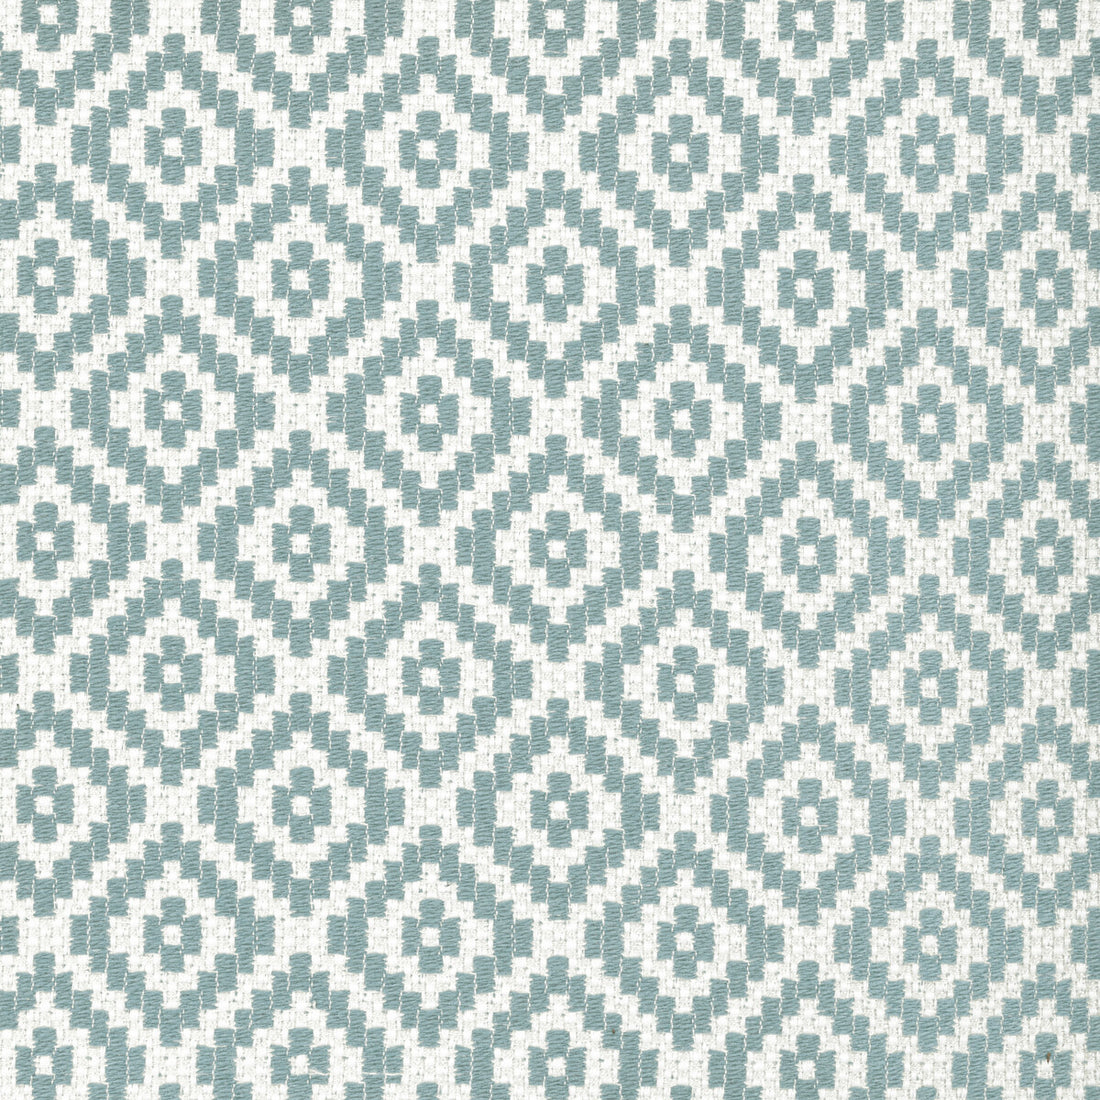 Kravet Design fabric in 36411-505 color - pattern 36411.505.0 - by Kravet Design in the Performance Crypton Home collection